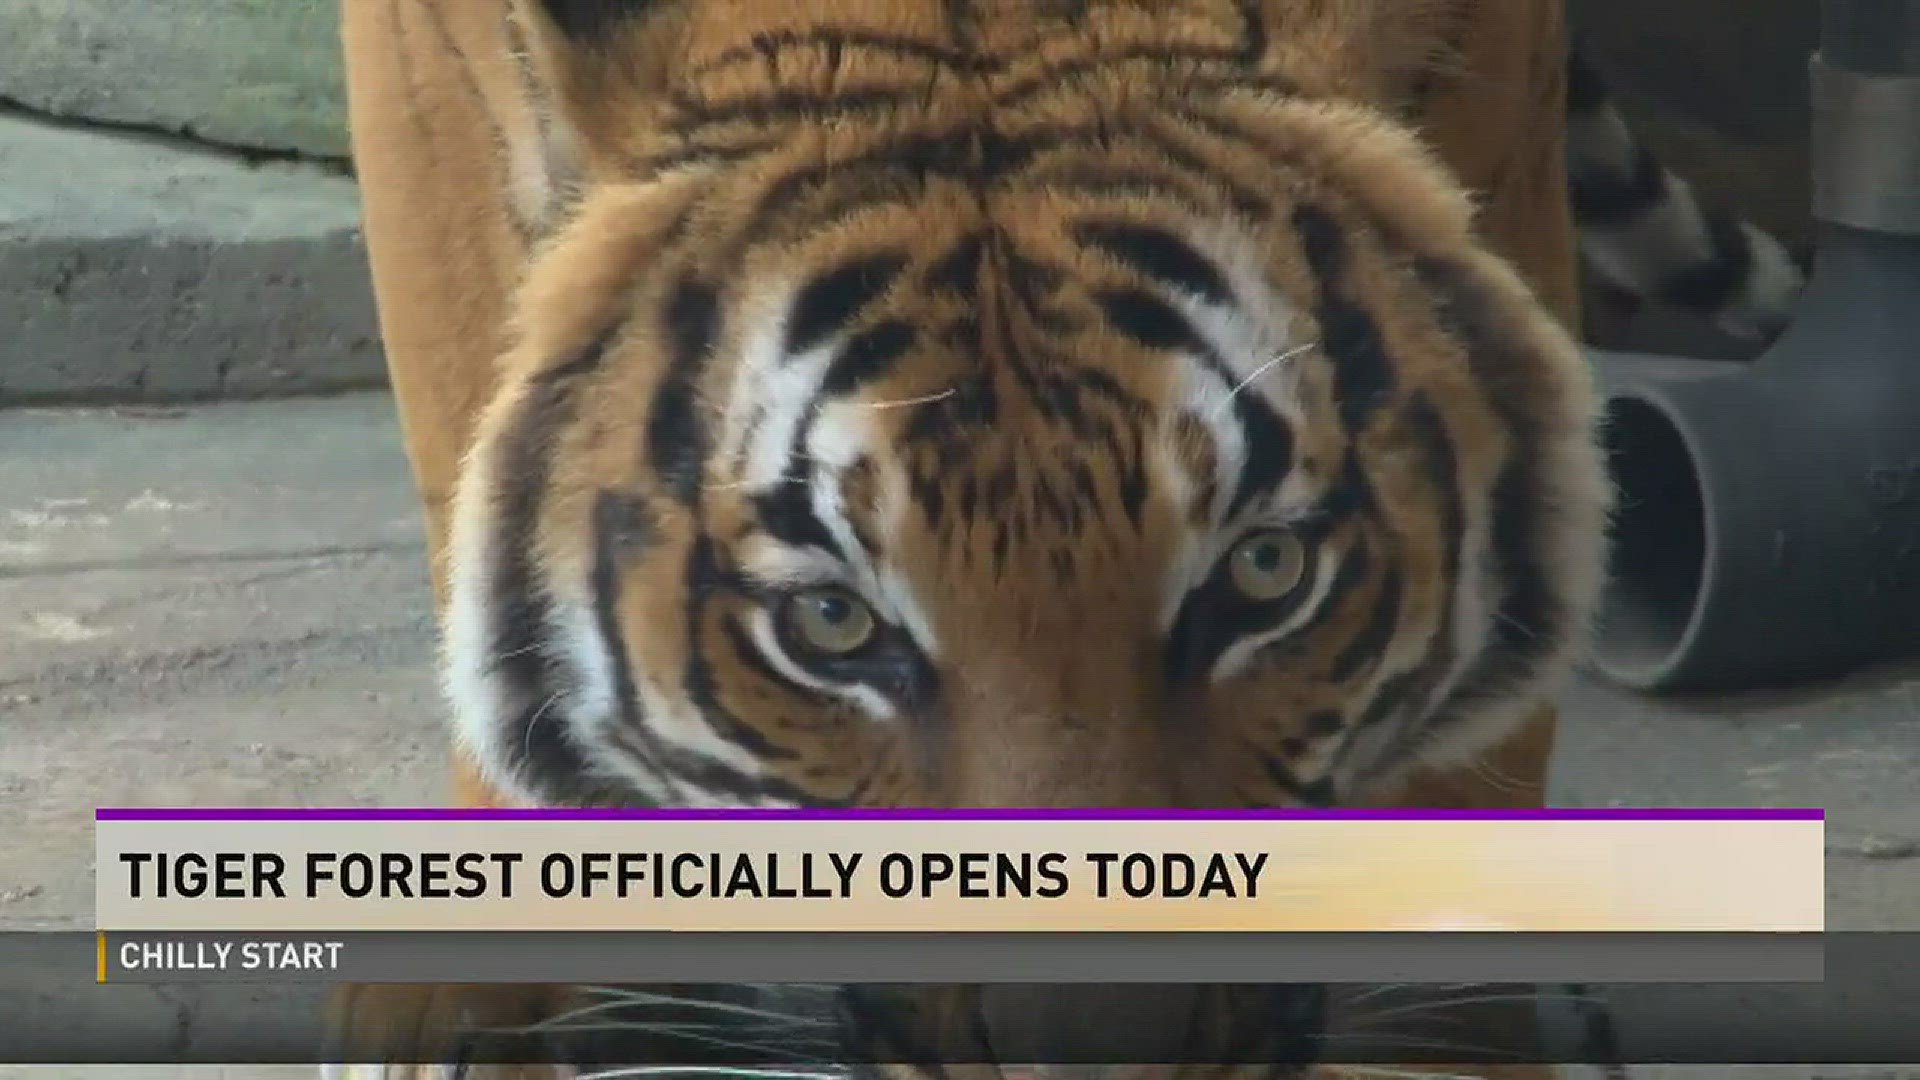 Zoo Knoxville is opening it's eagerly anticipated Tiger Forest on Friday. It will be home to Malayan tigers Bashir, Tanvir, and Arya.